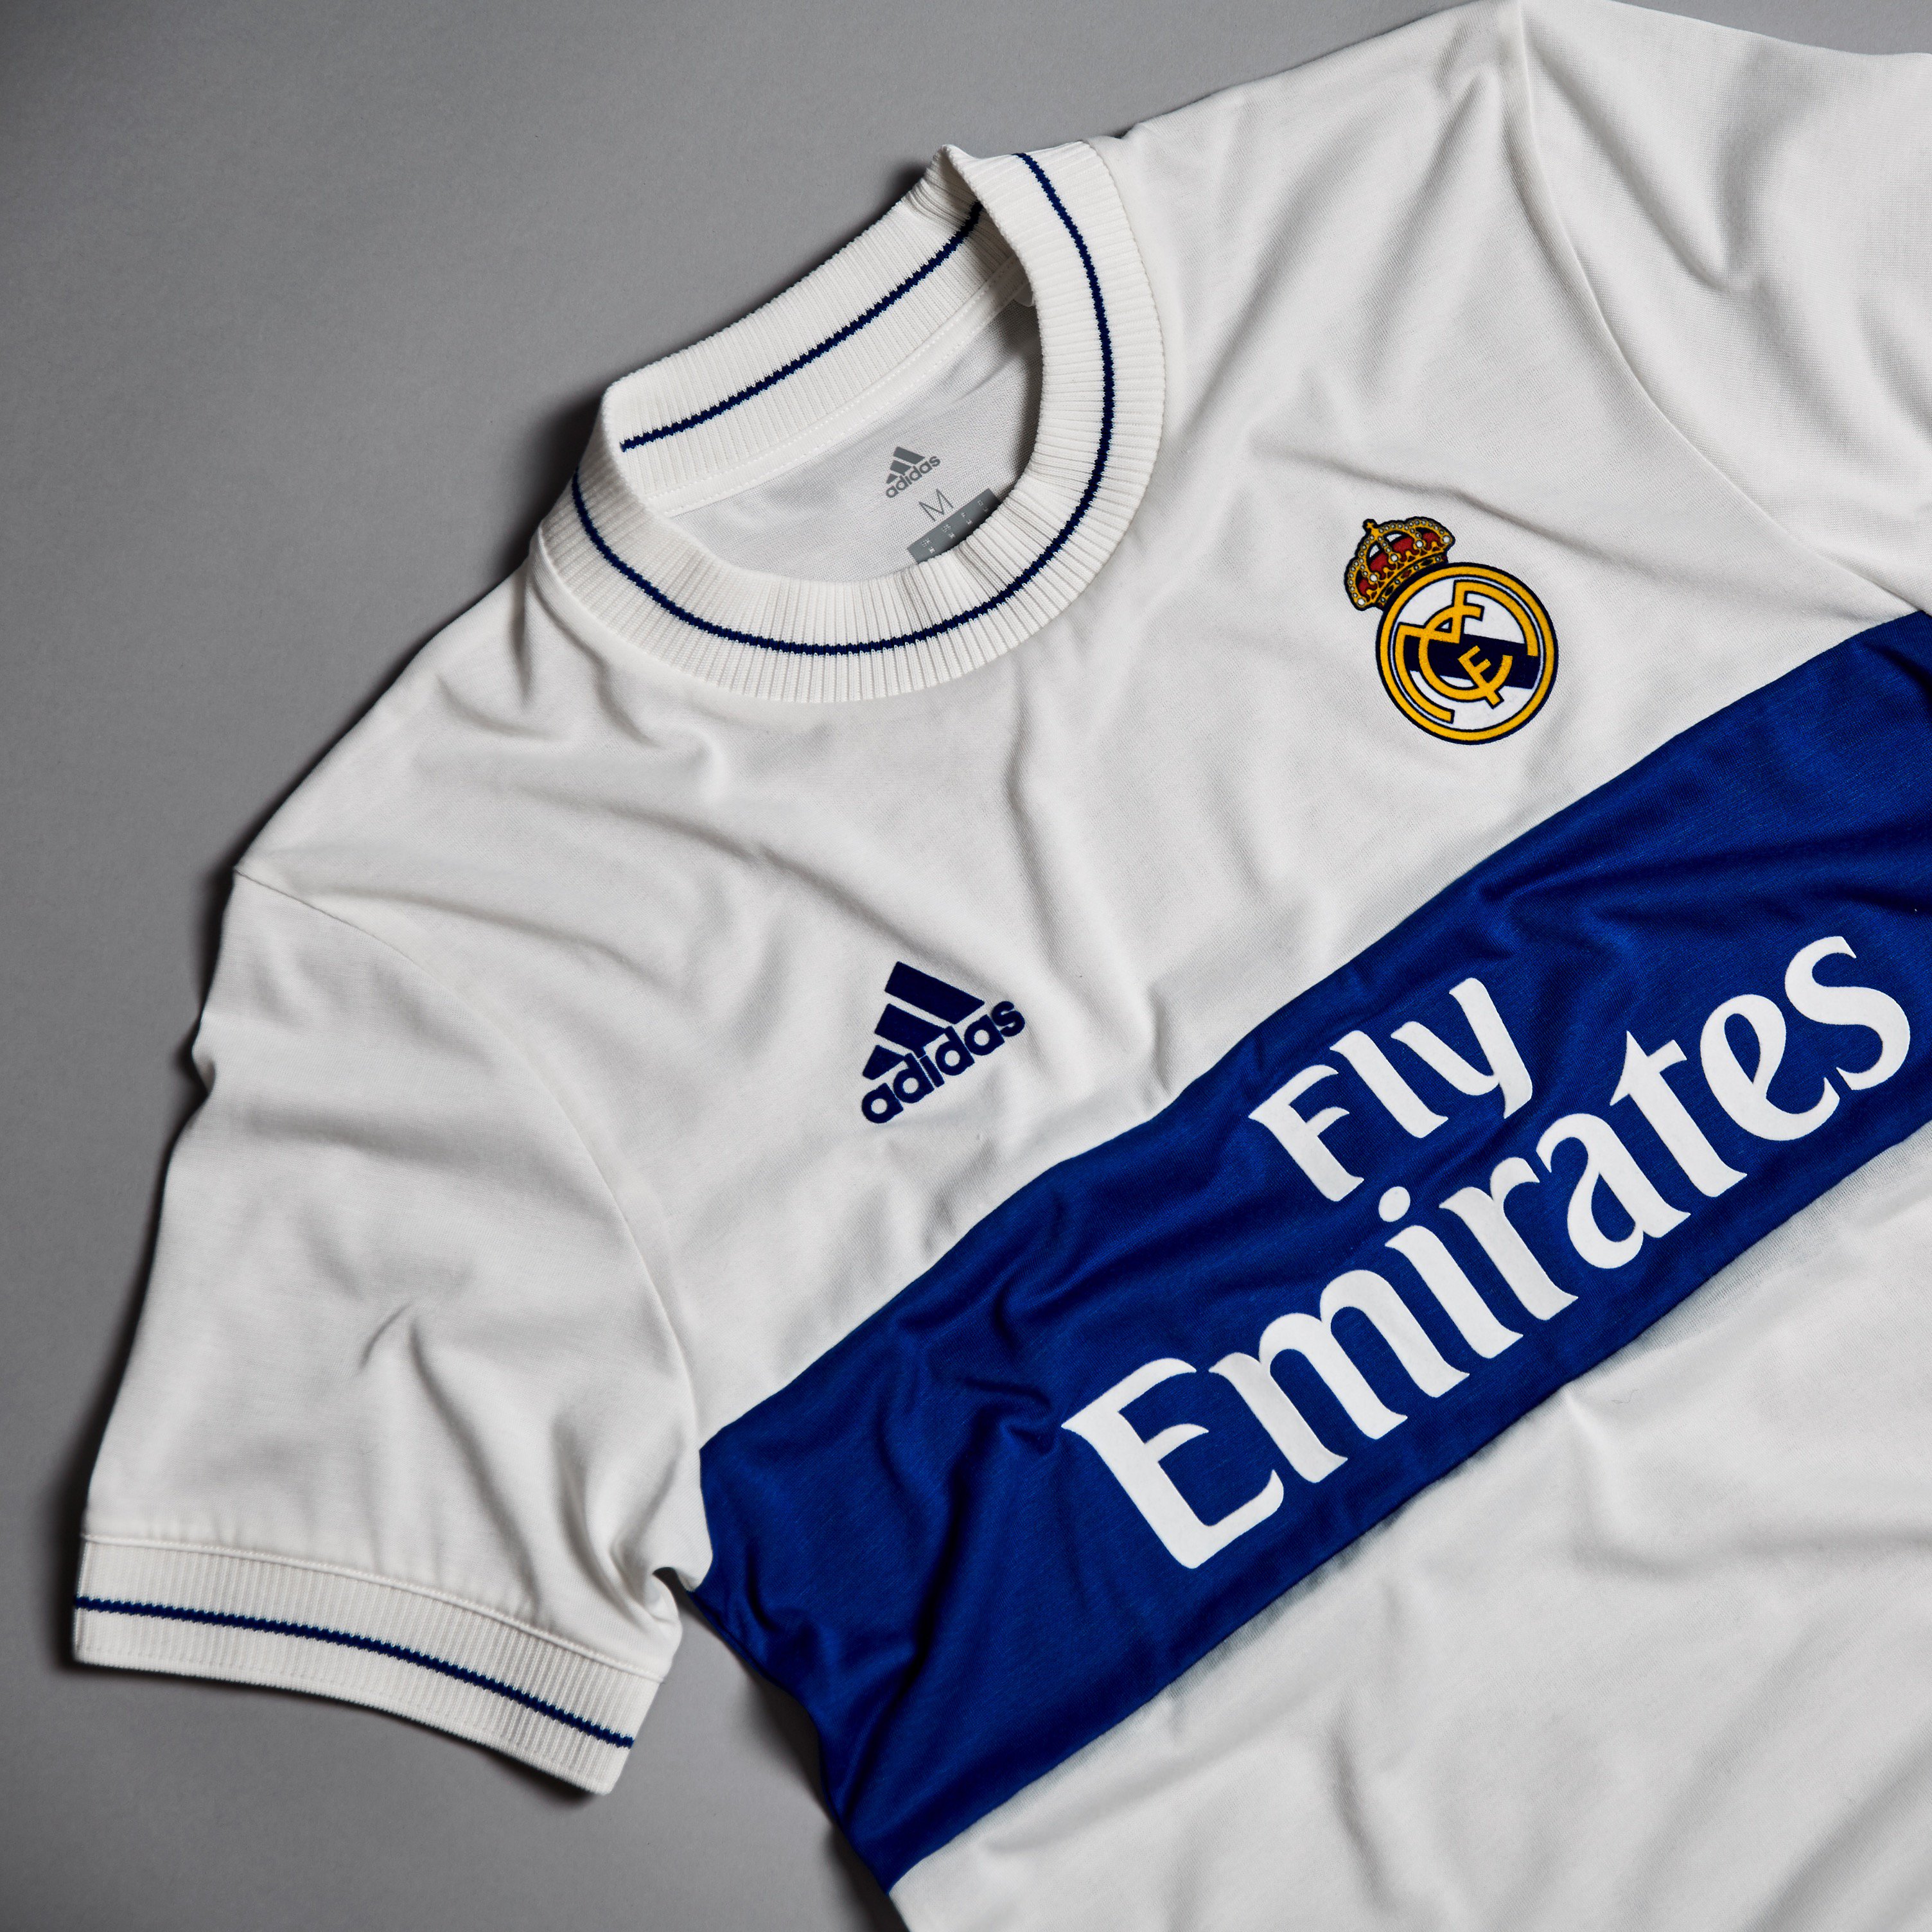 Pro:Direct Soccer on Twitter: "Introducing the stunning adidas Real Madrid Icon Jersey. Presentation box all. https://t.co/7vvgvWr2jB" / Twitter